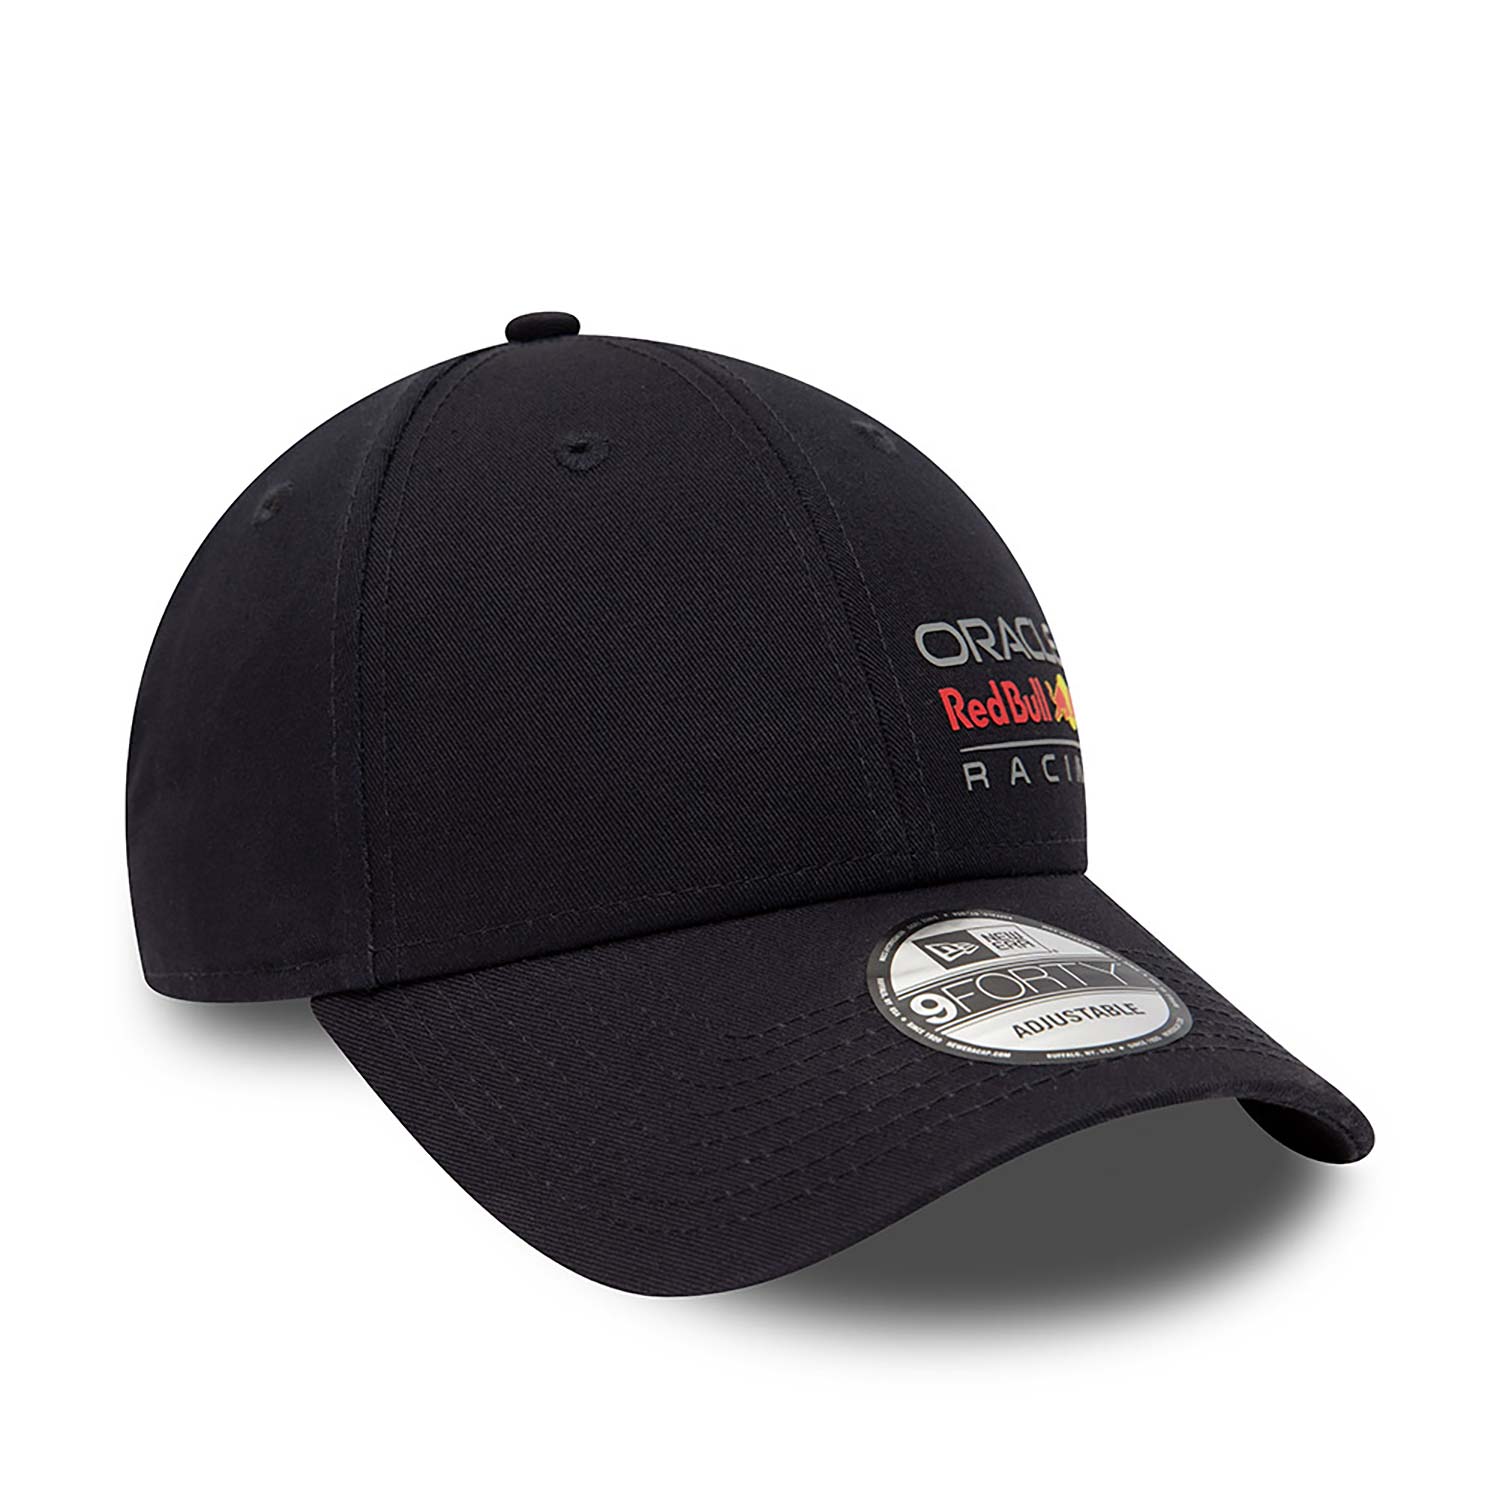 Red Bull Essential Black 9FORTY Adjustable Cap